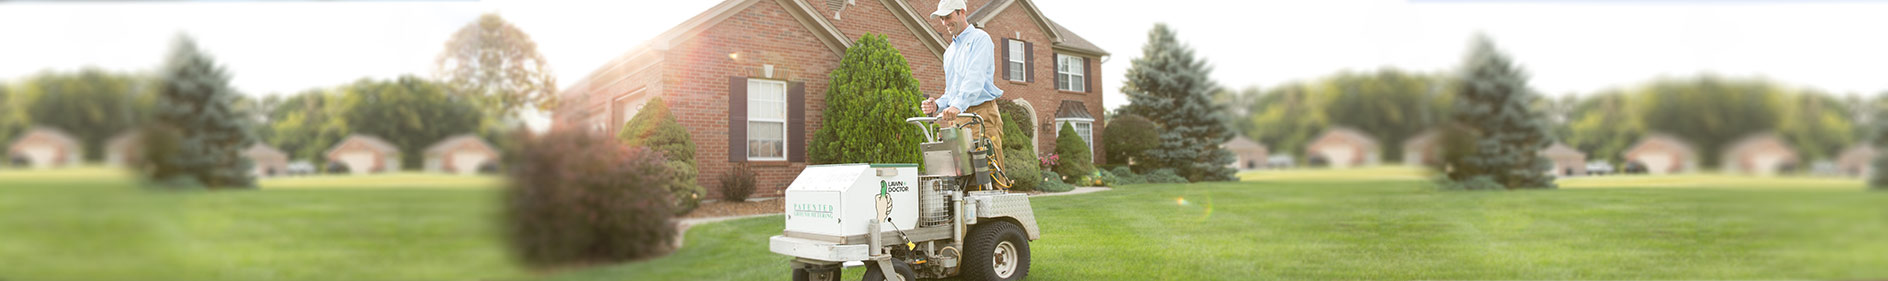 Lawn Care Business Systems